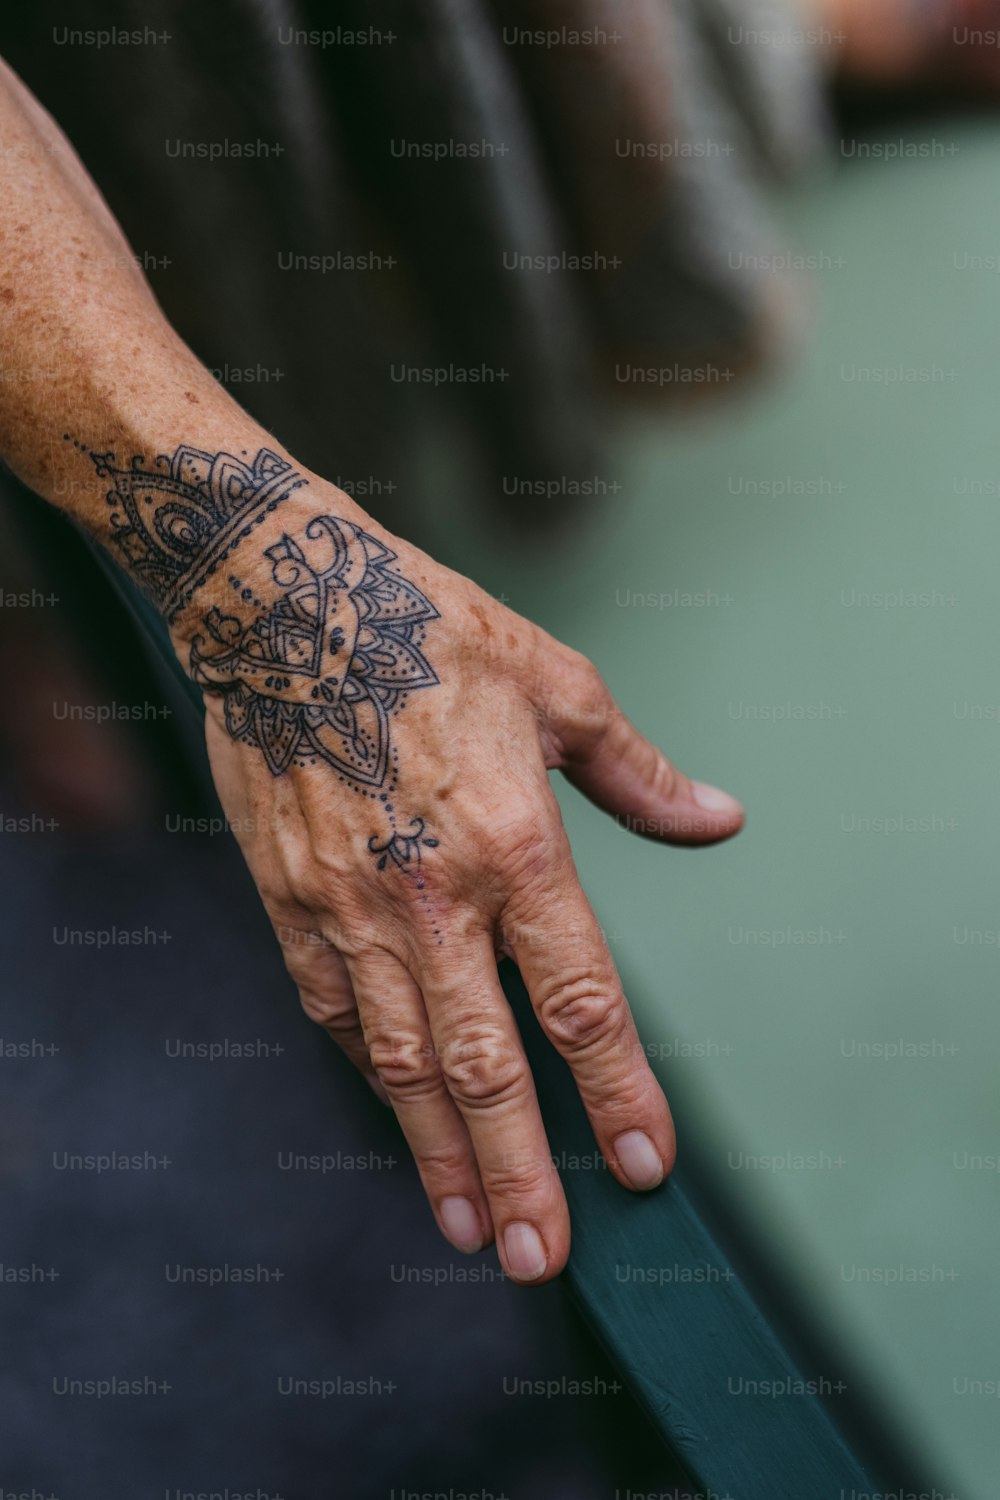 a person's hand with a tattoo on it